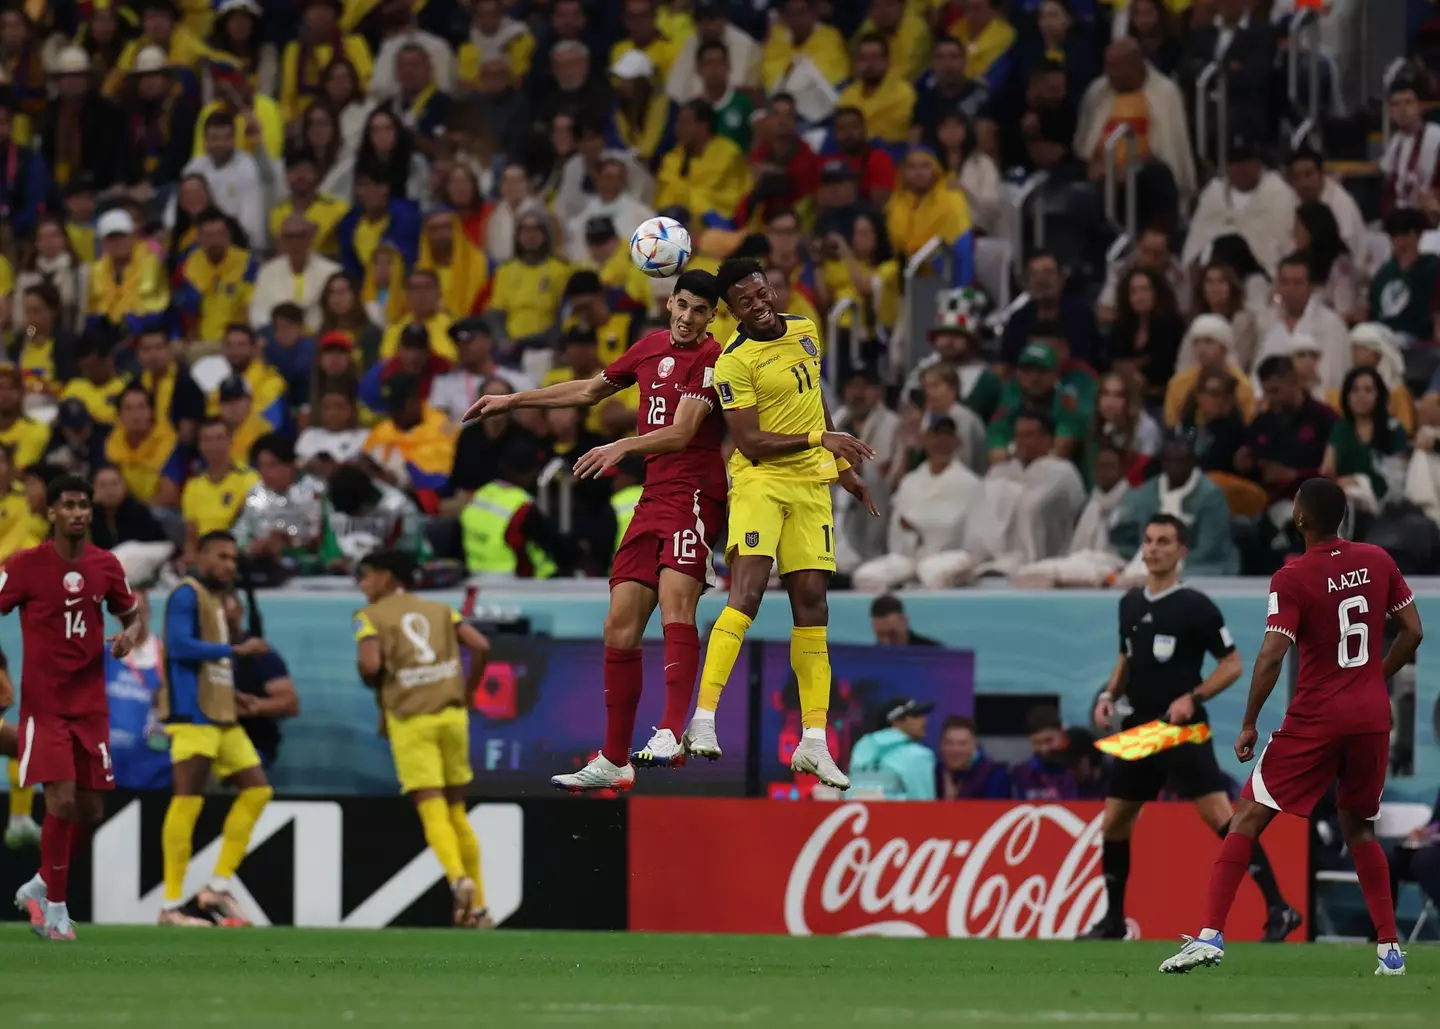 Karim Boudiaf of Qatar heads the ball over Enner Valencia of Ecuador at Al Bayt Stadium during game one of the 2022 FIFA World Cup.